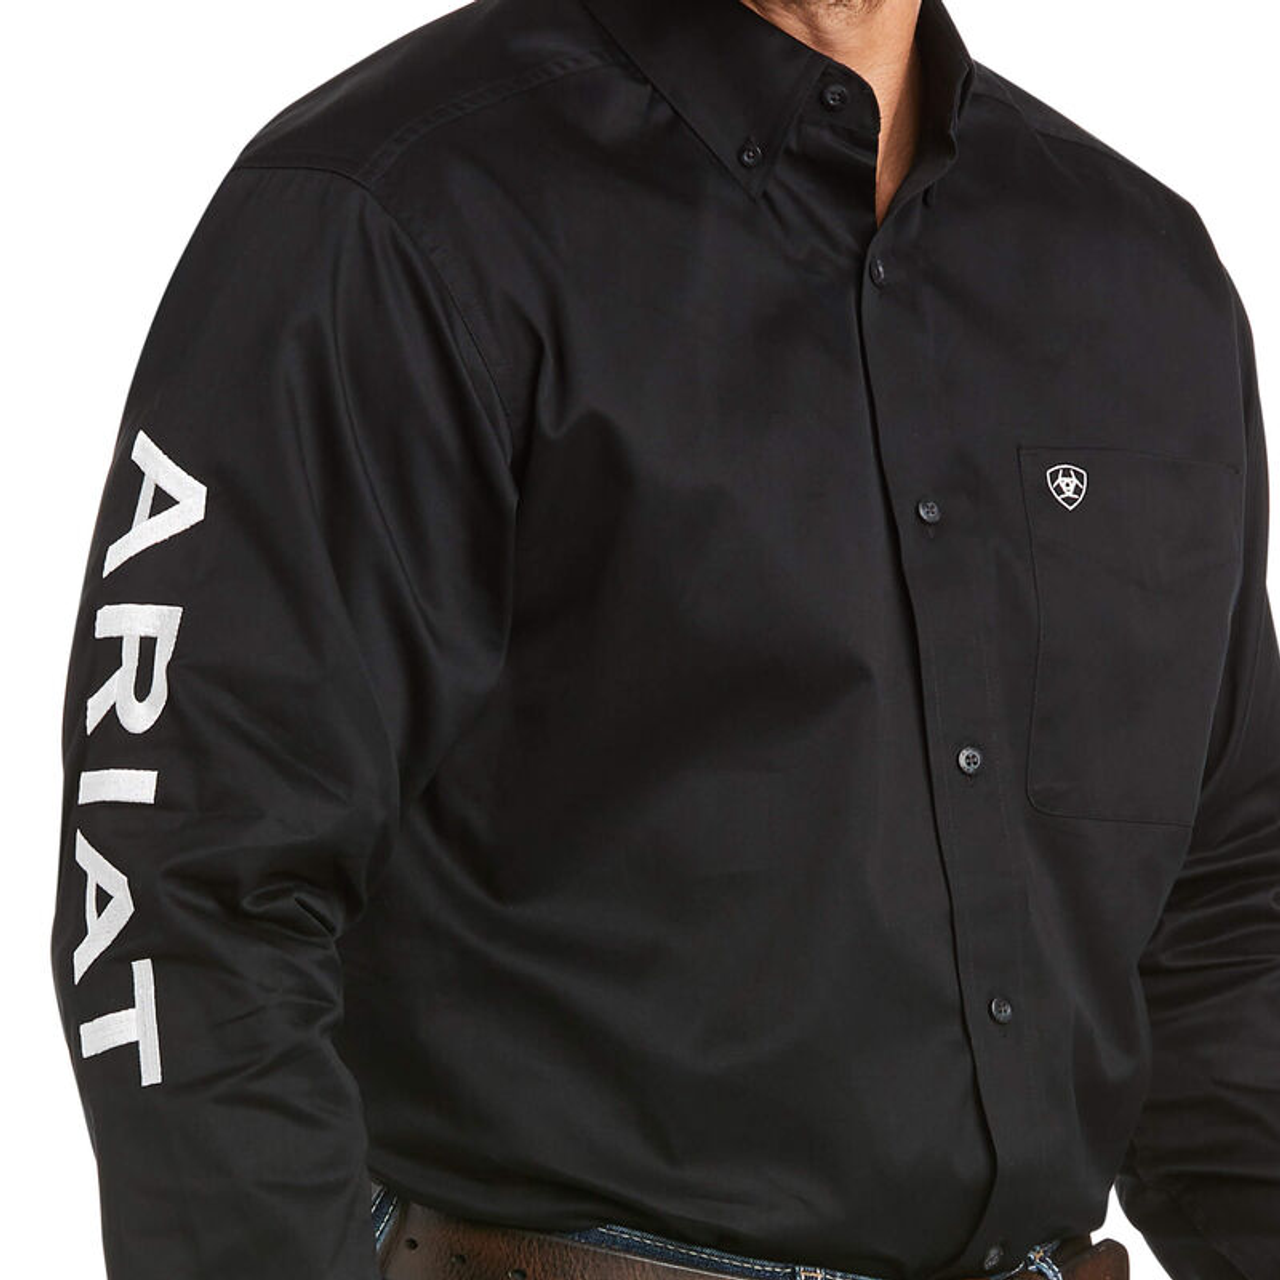 Ariat Men's Team Logo Twill Classic Fit Shirt - 10017497 - Black shirt with white logo lettering down sleeve